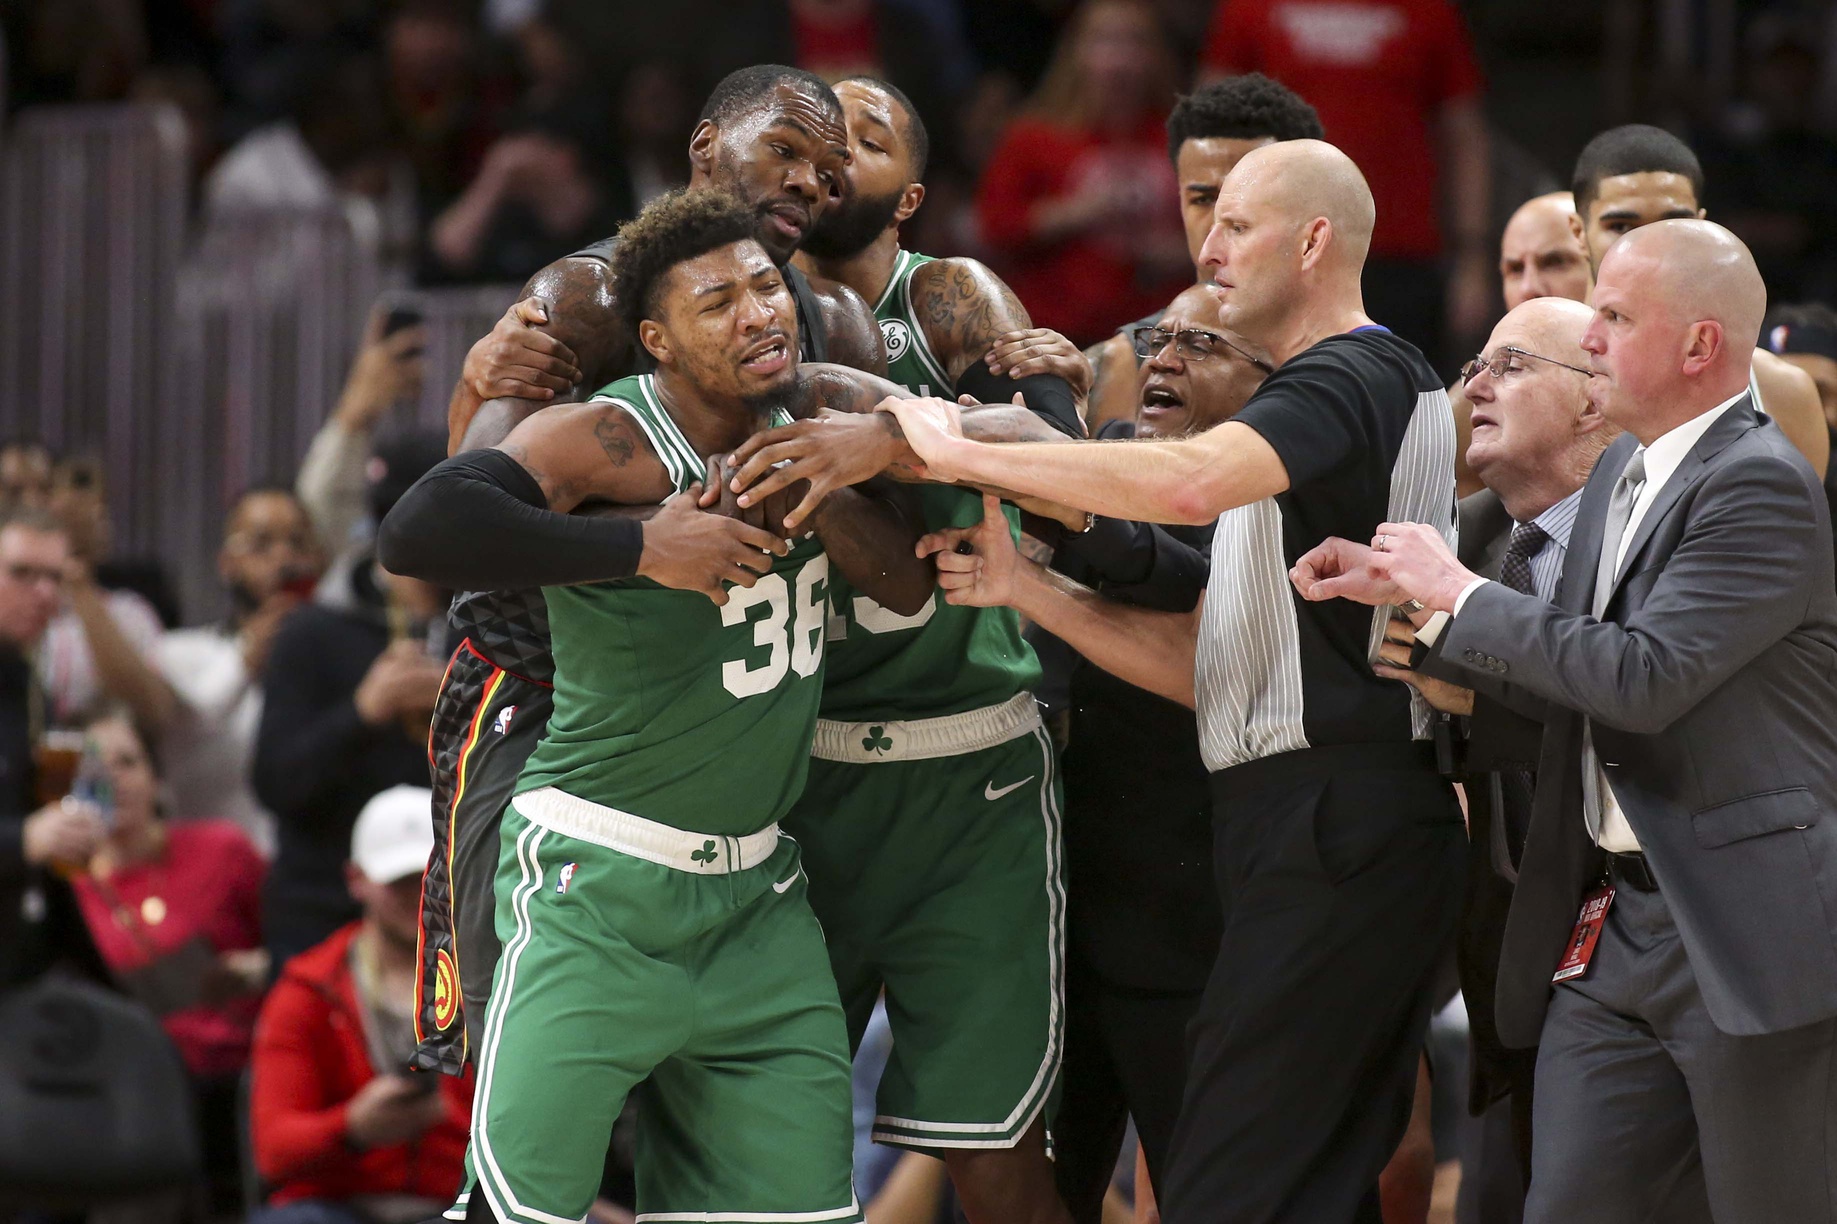 WATCH: Marcus Smart goes after DeAndre' Bembry following ejection